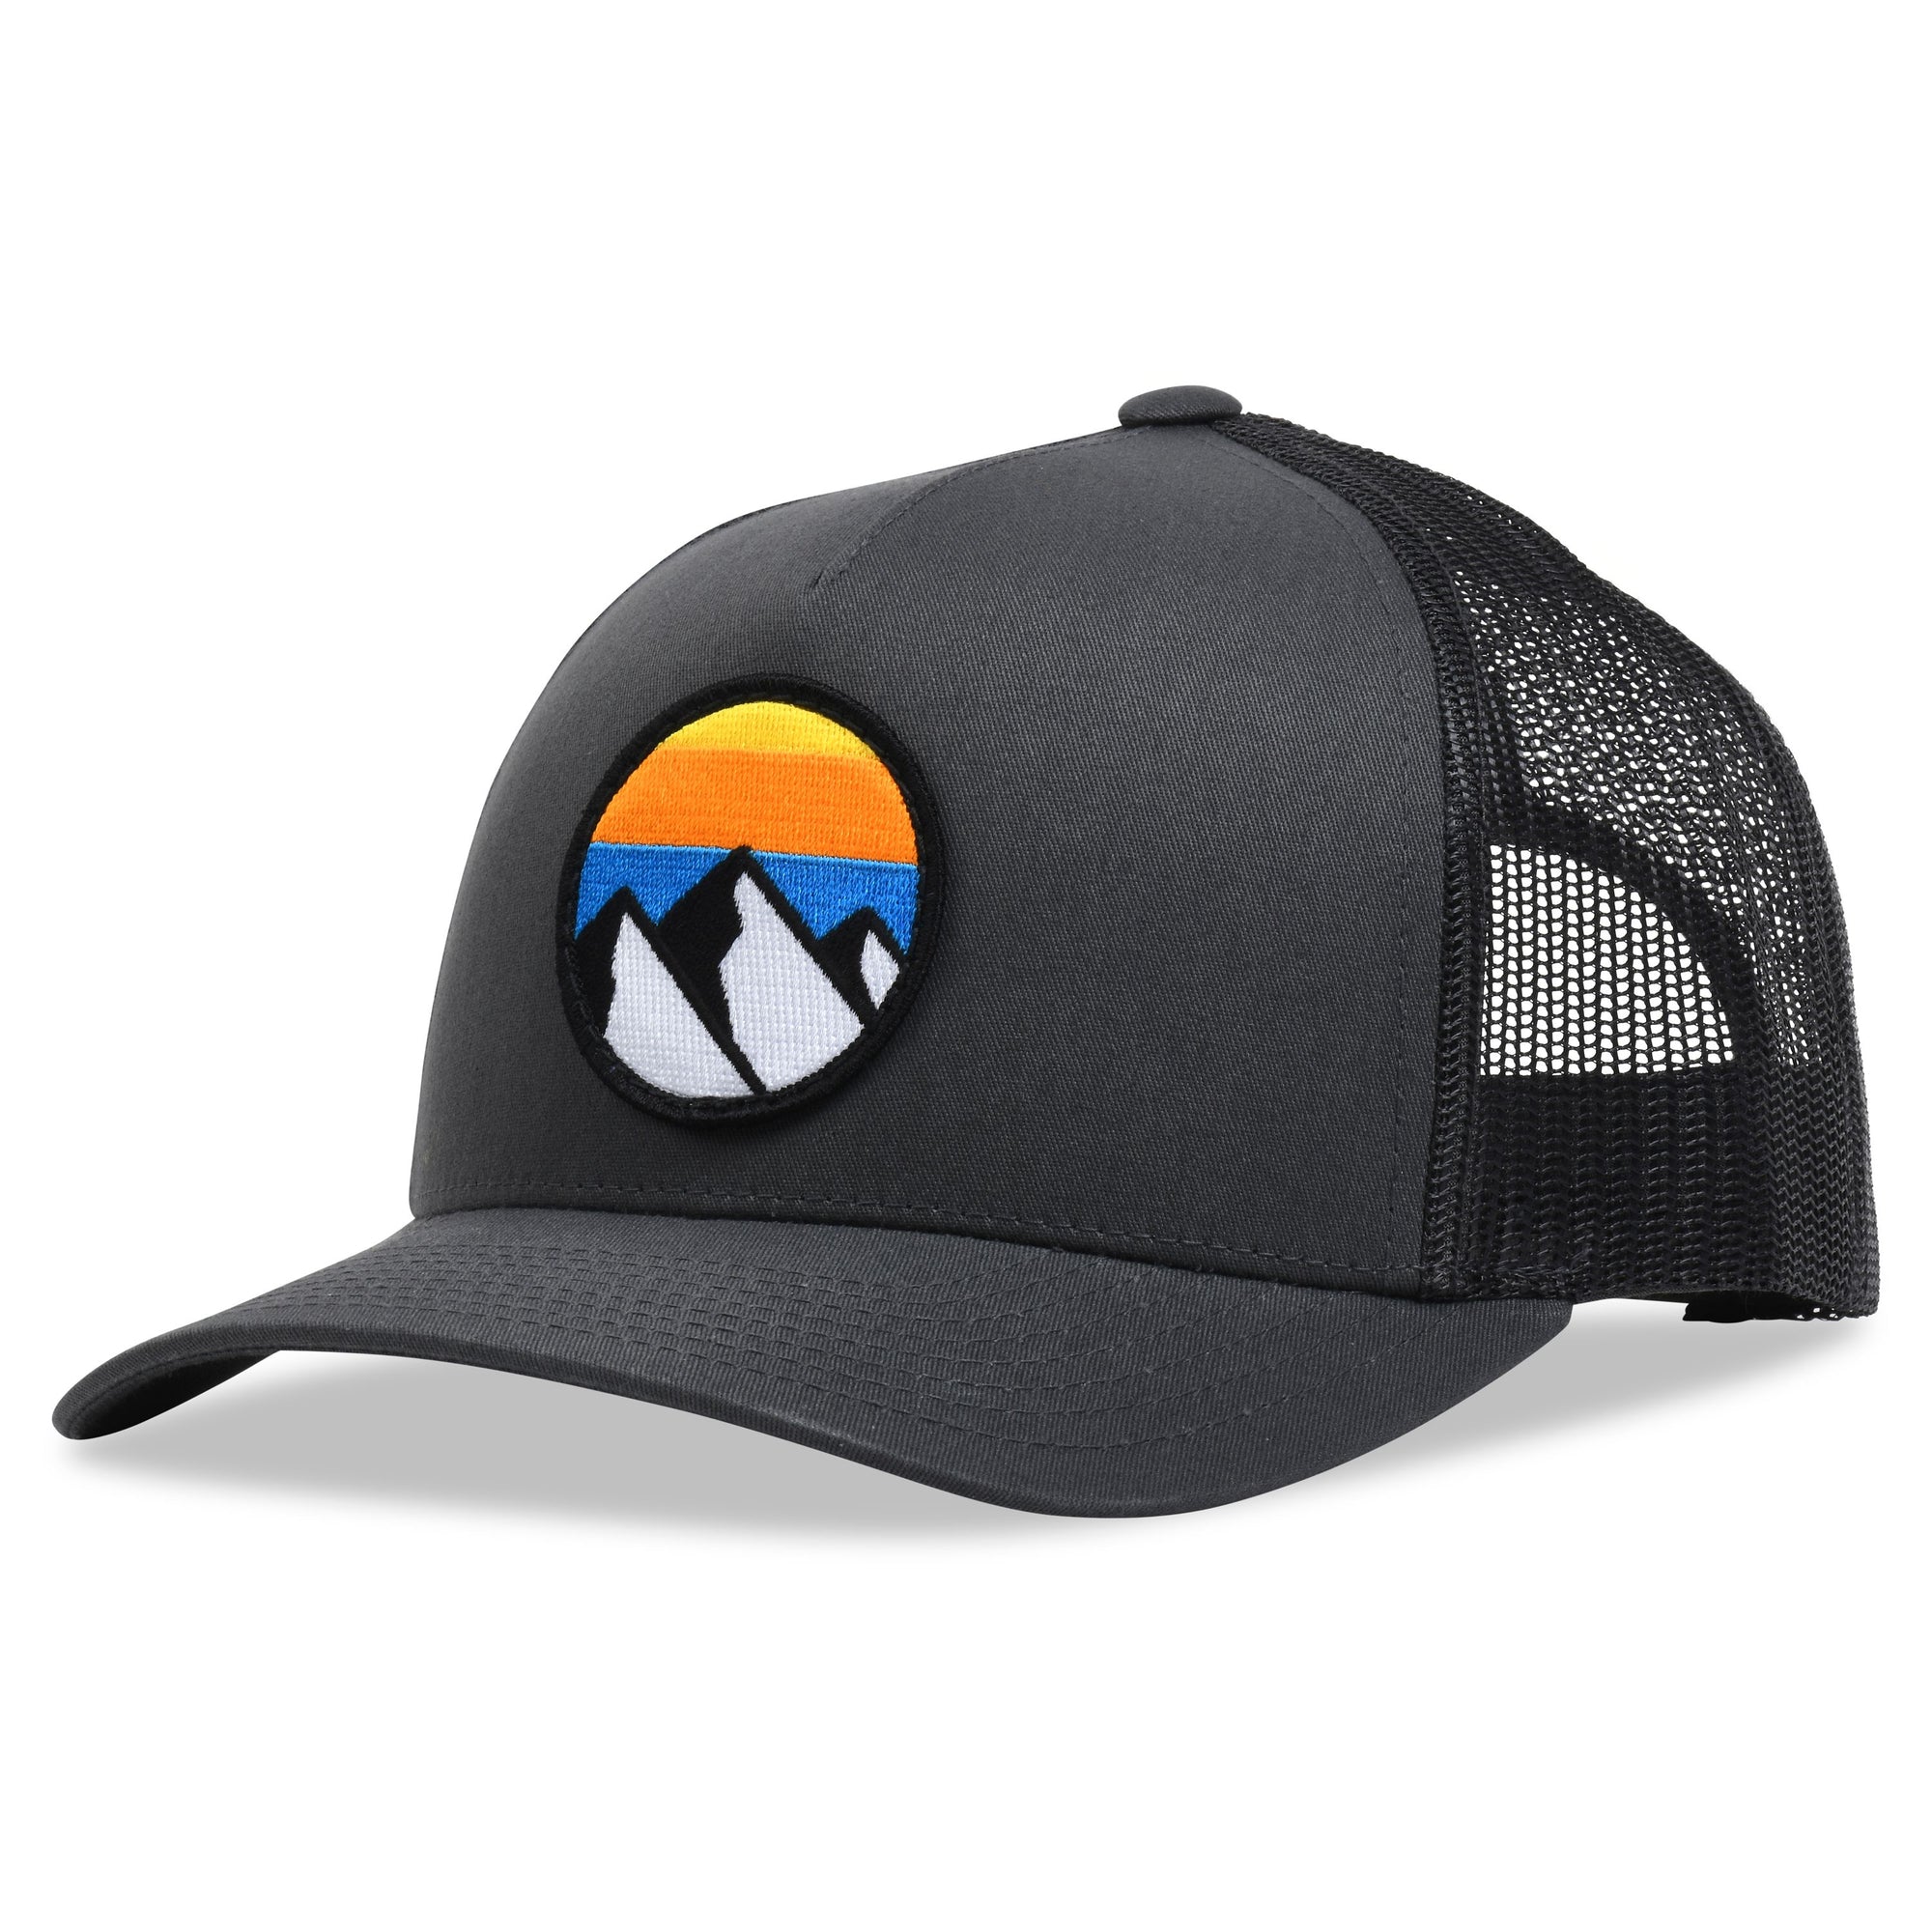 Life On Outdoors Hat Embroidered Logo Patch, Mid-profile Snapback